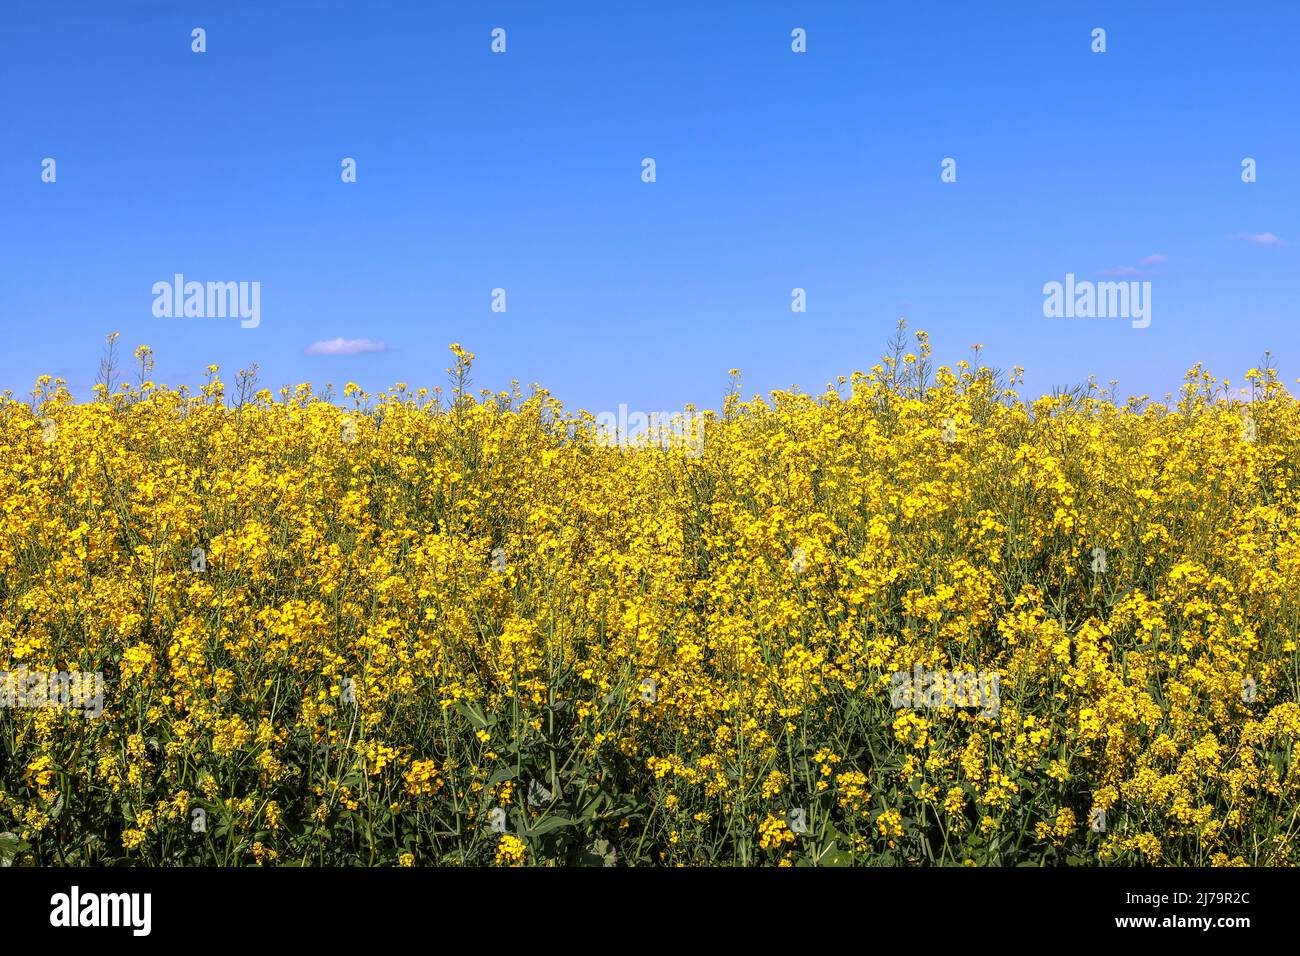 Yellow canola field with blue clear sky captured in spring in the agricultural area near St-Prex, Switzerland. The composition and hues are matching t Stock Photo